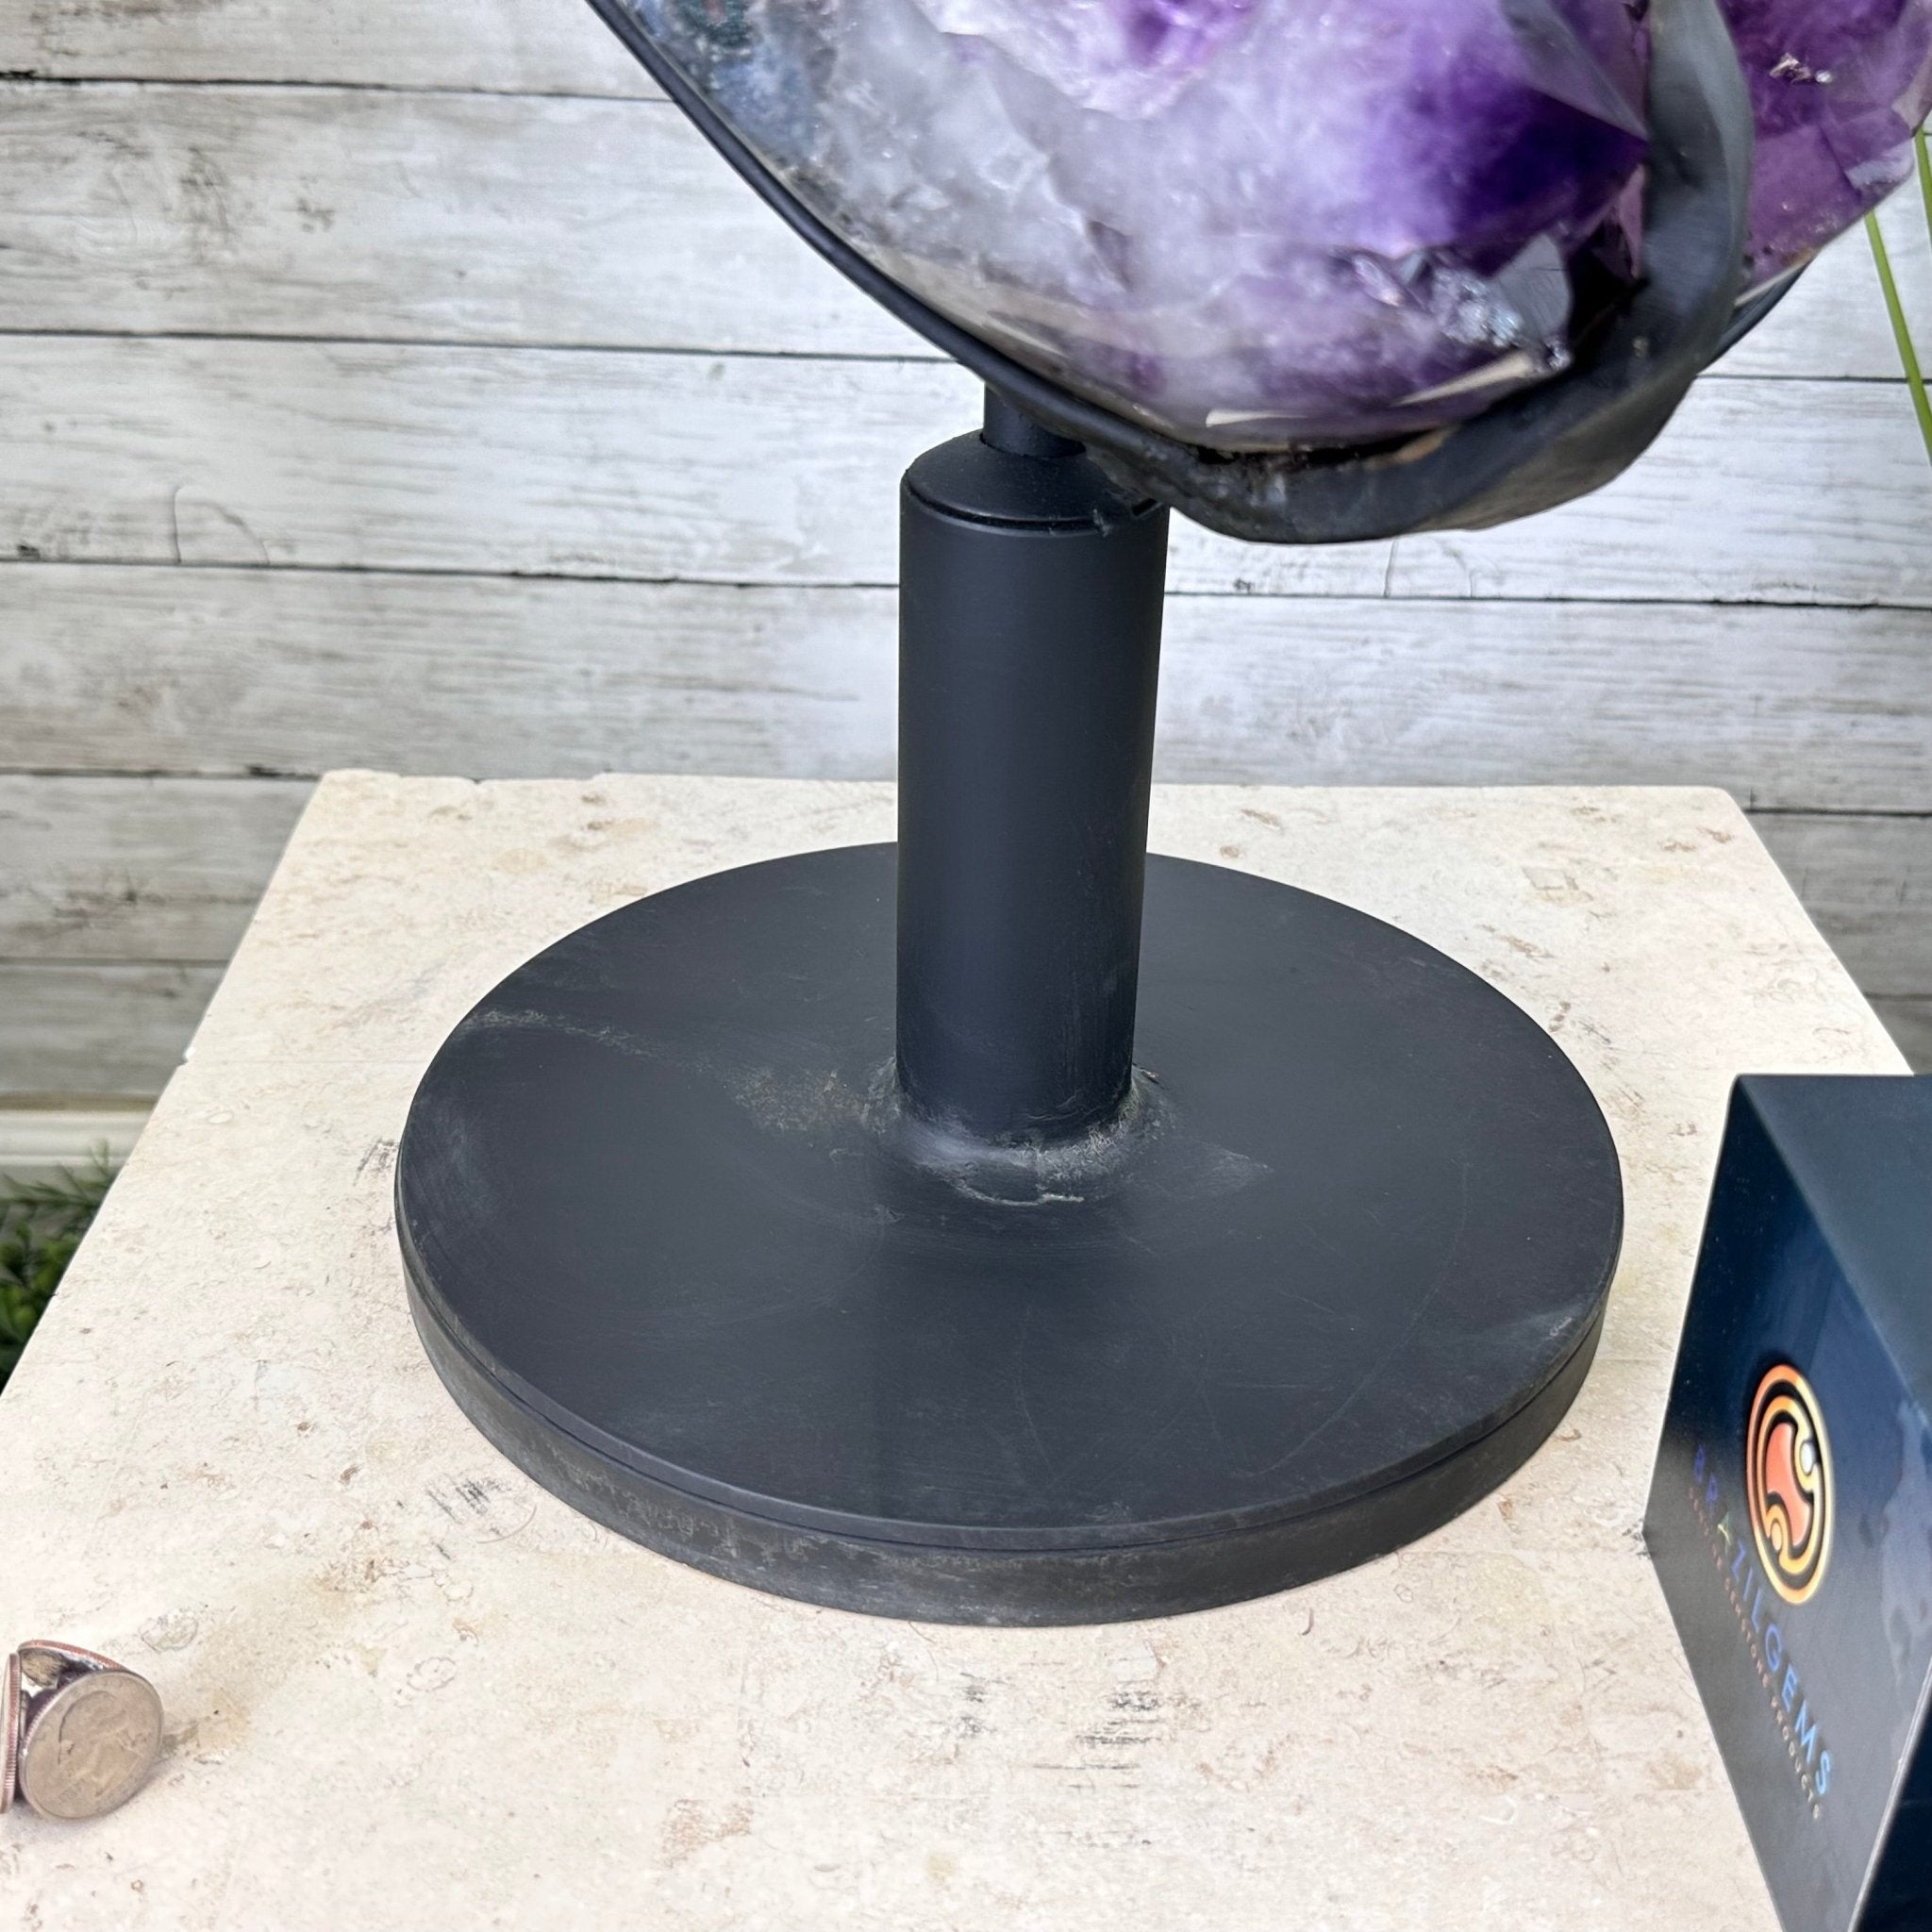 Super Quality Amethyst Cluster on Rotating Stand, 141 lbs & 32" Tall #5492-0029 - Brazil GemsBrazil GemsSuper Quality Amethyst Cluster on Rotating Stand, 141 lbs & 32" Tall #5492-0029Clusters on Rotating Bases5492-0029